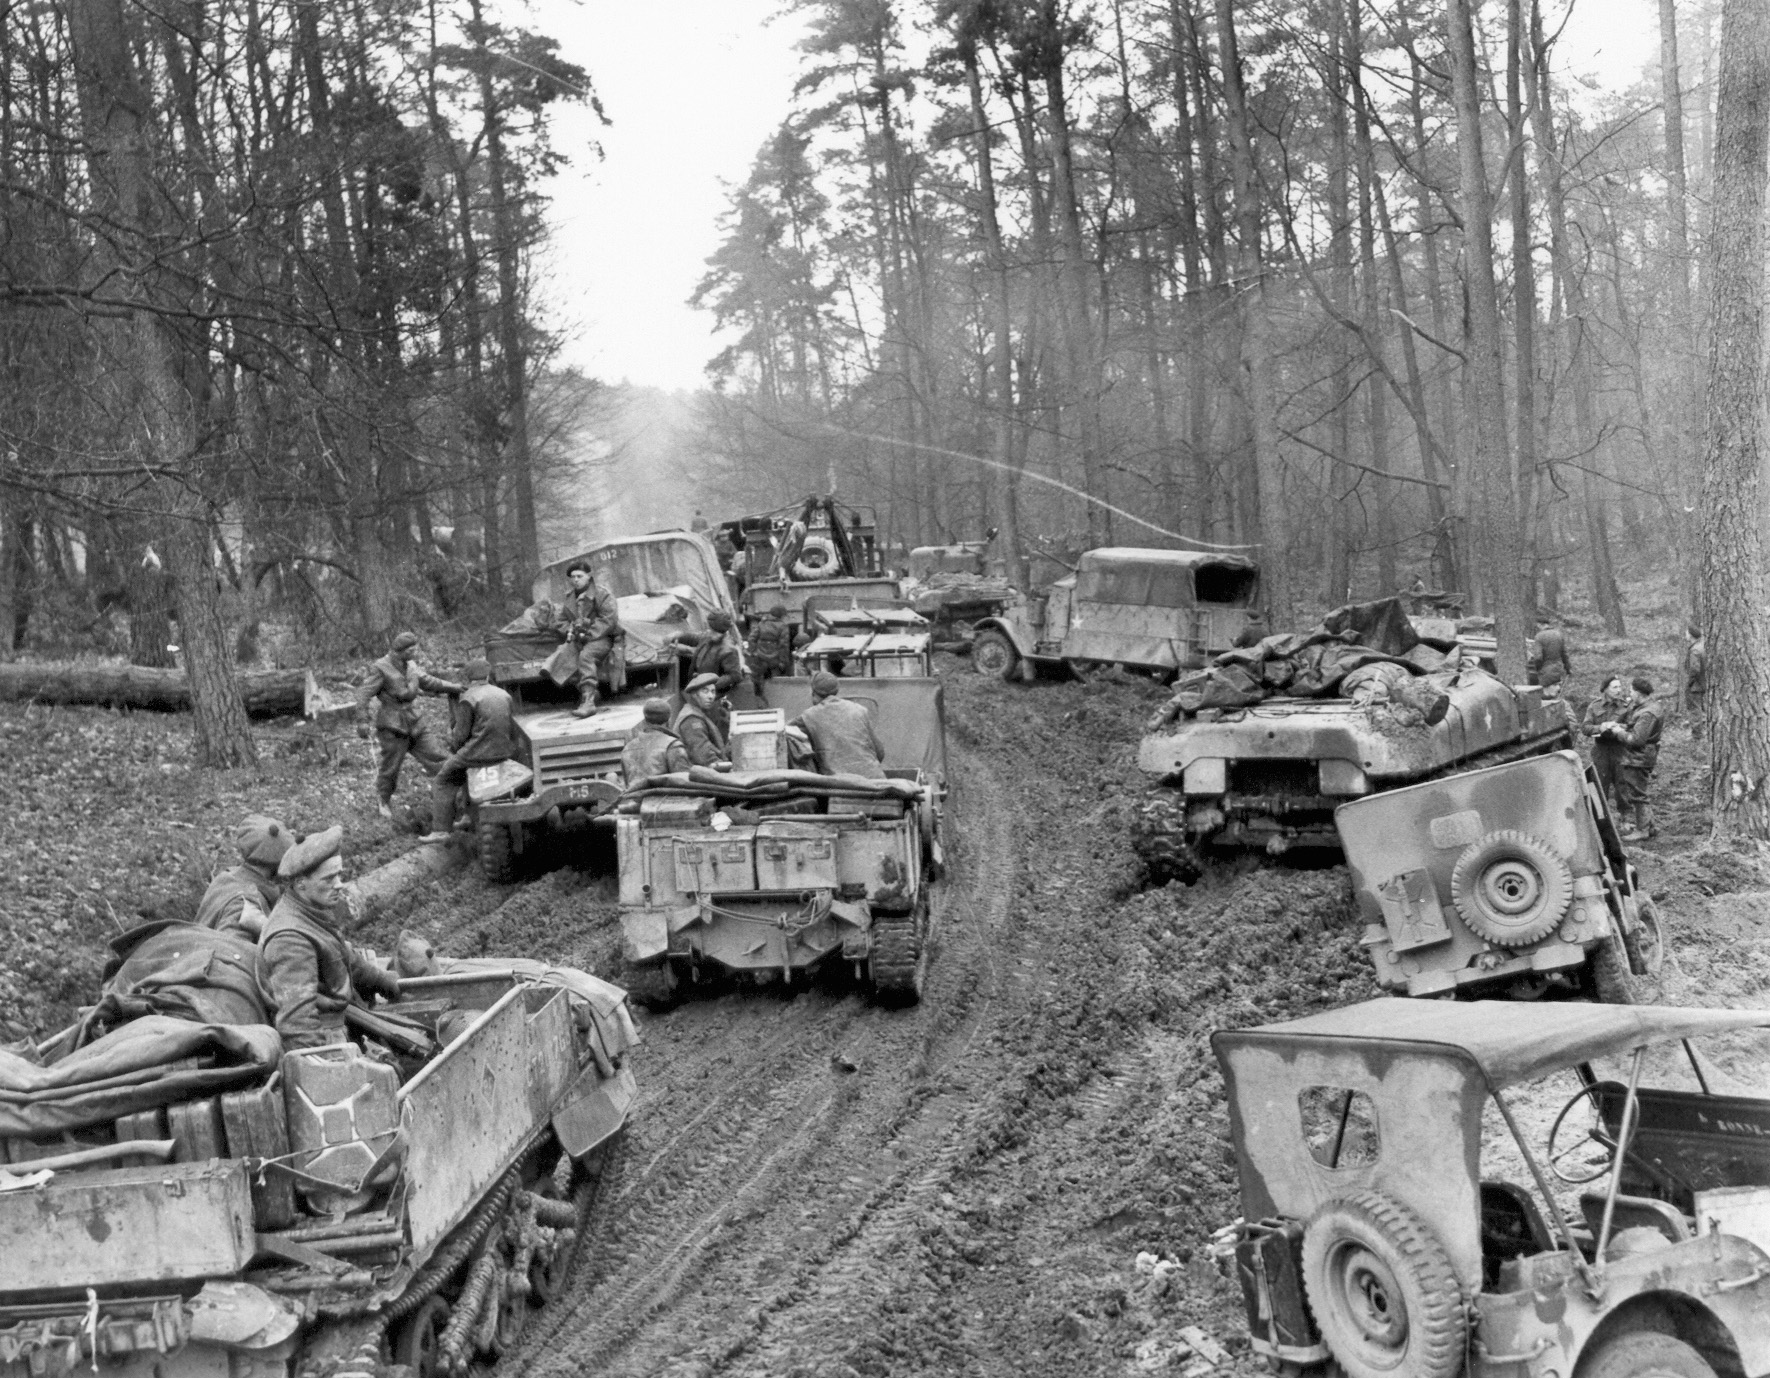 The soggy roads that traversed the Reichswald were a tremendous obstacle to Allied offensive movement. In this image, Canadian vehicles are mired in the muck, creating a huge traffic jam and slowing Field Marshal Montgomery’s timetable.